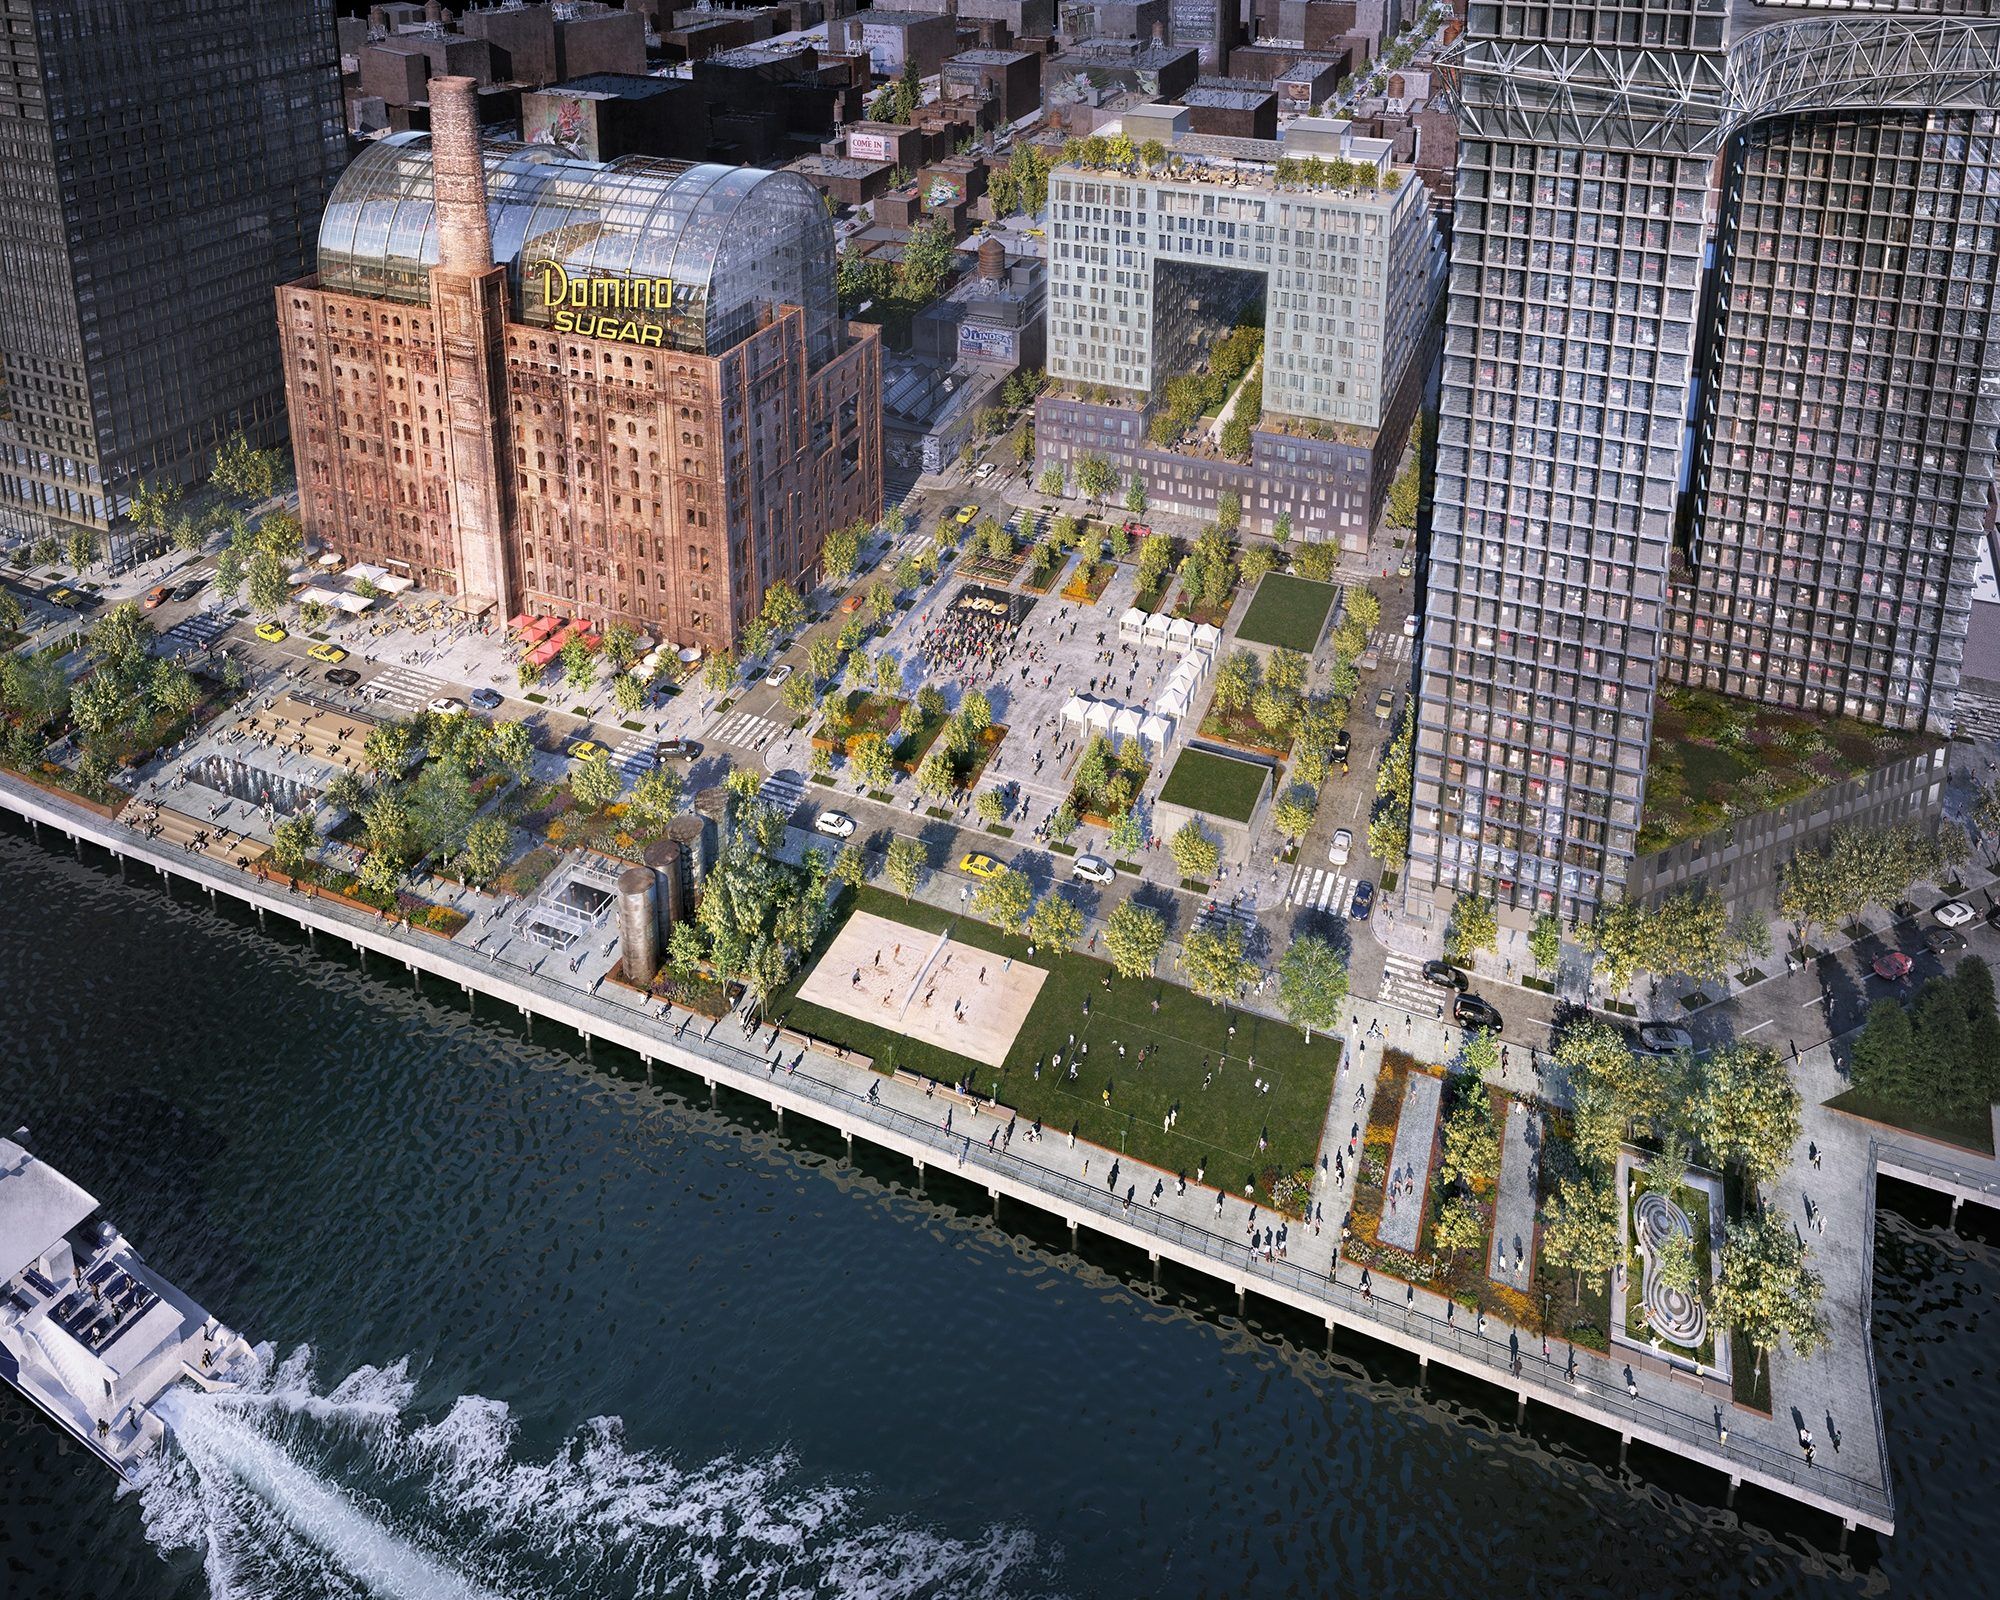 Take A Look At Williamsburg’s New Waterfront Park, Opening This June